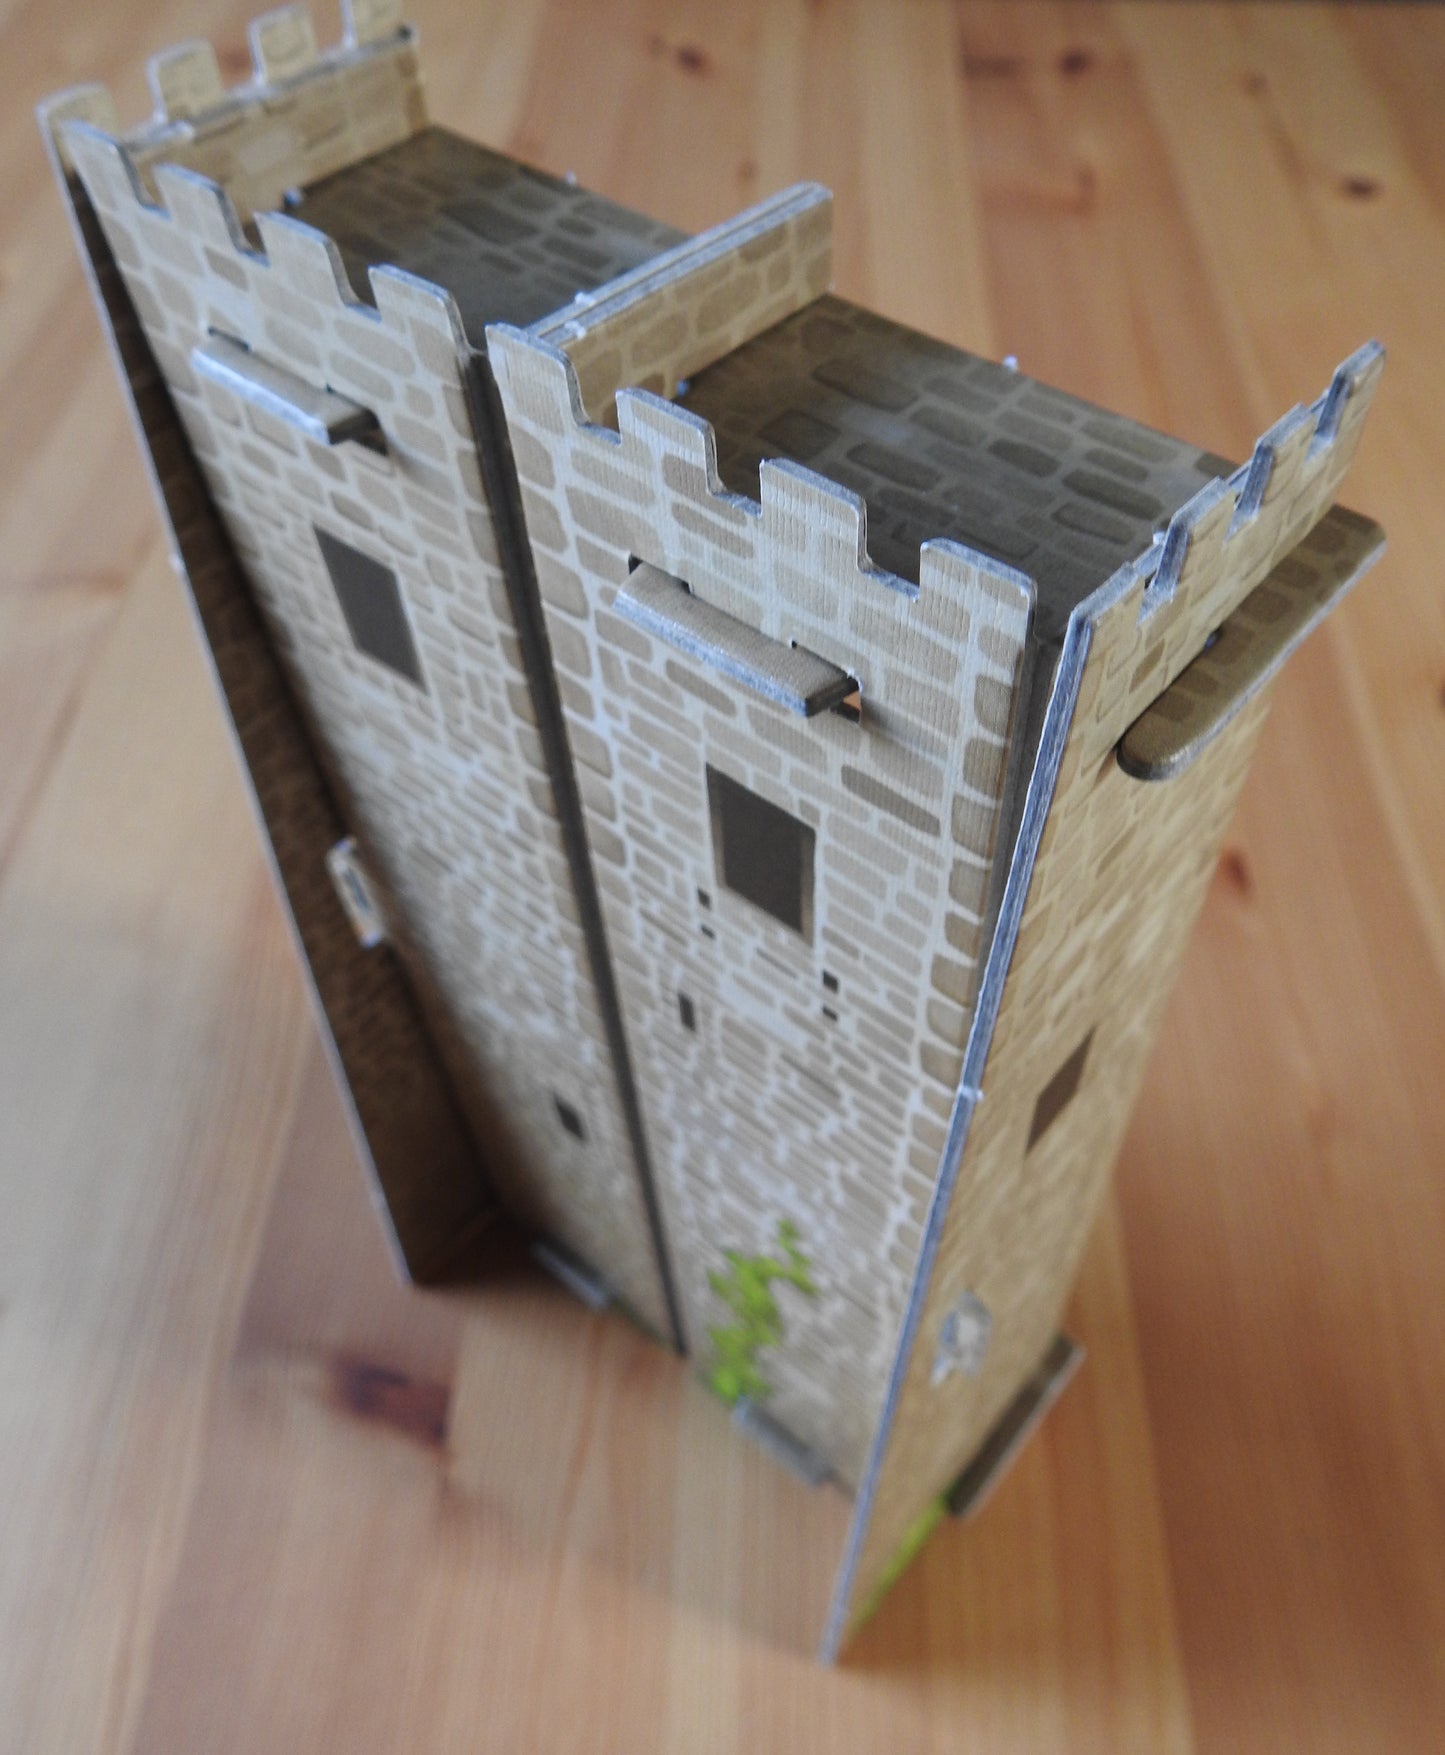 View showing the back of the Tile Tower accessory for Carcassonne, which is shaped like a castle tower.